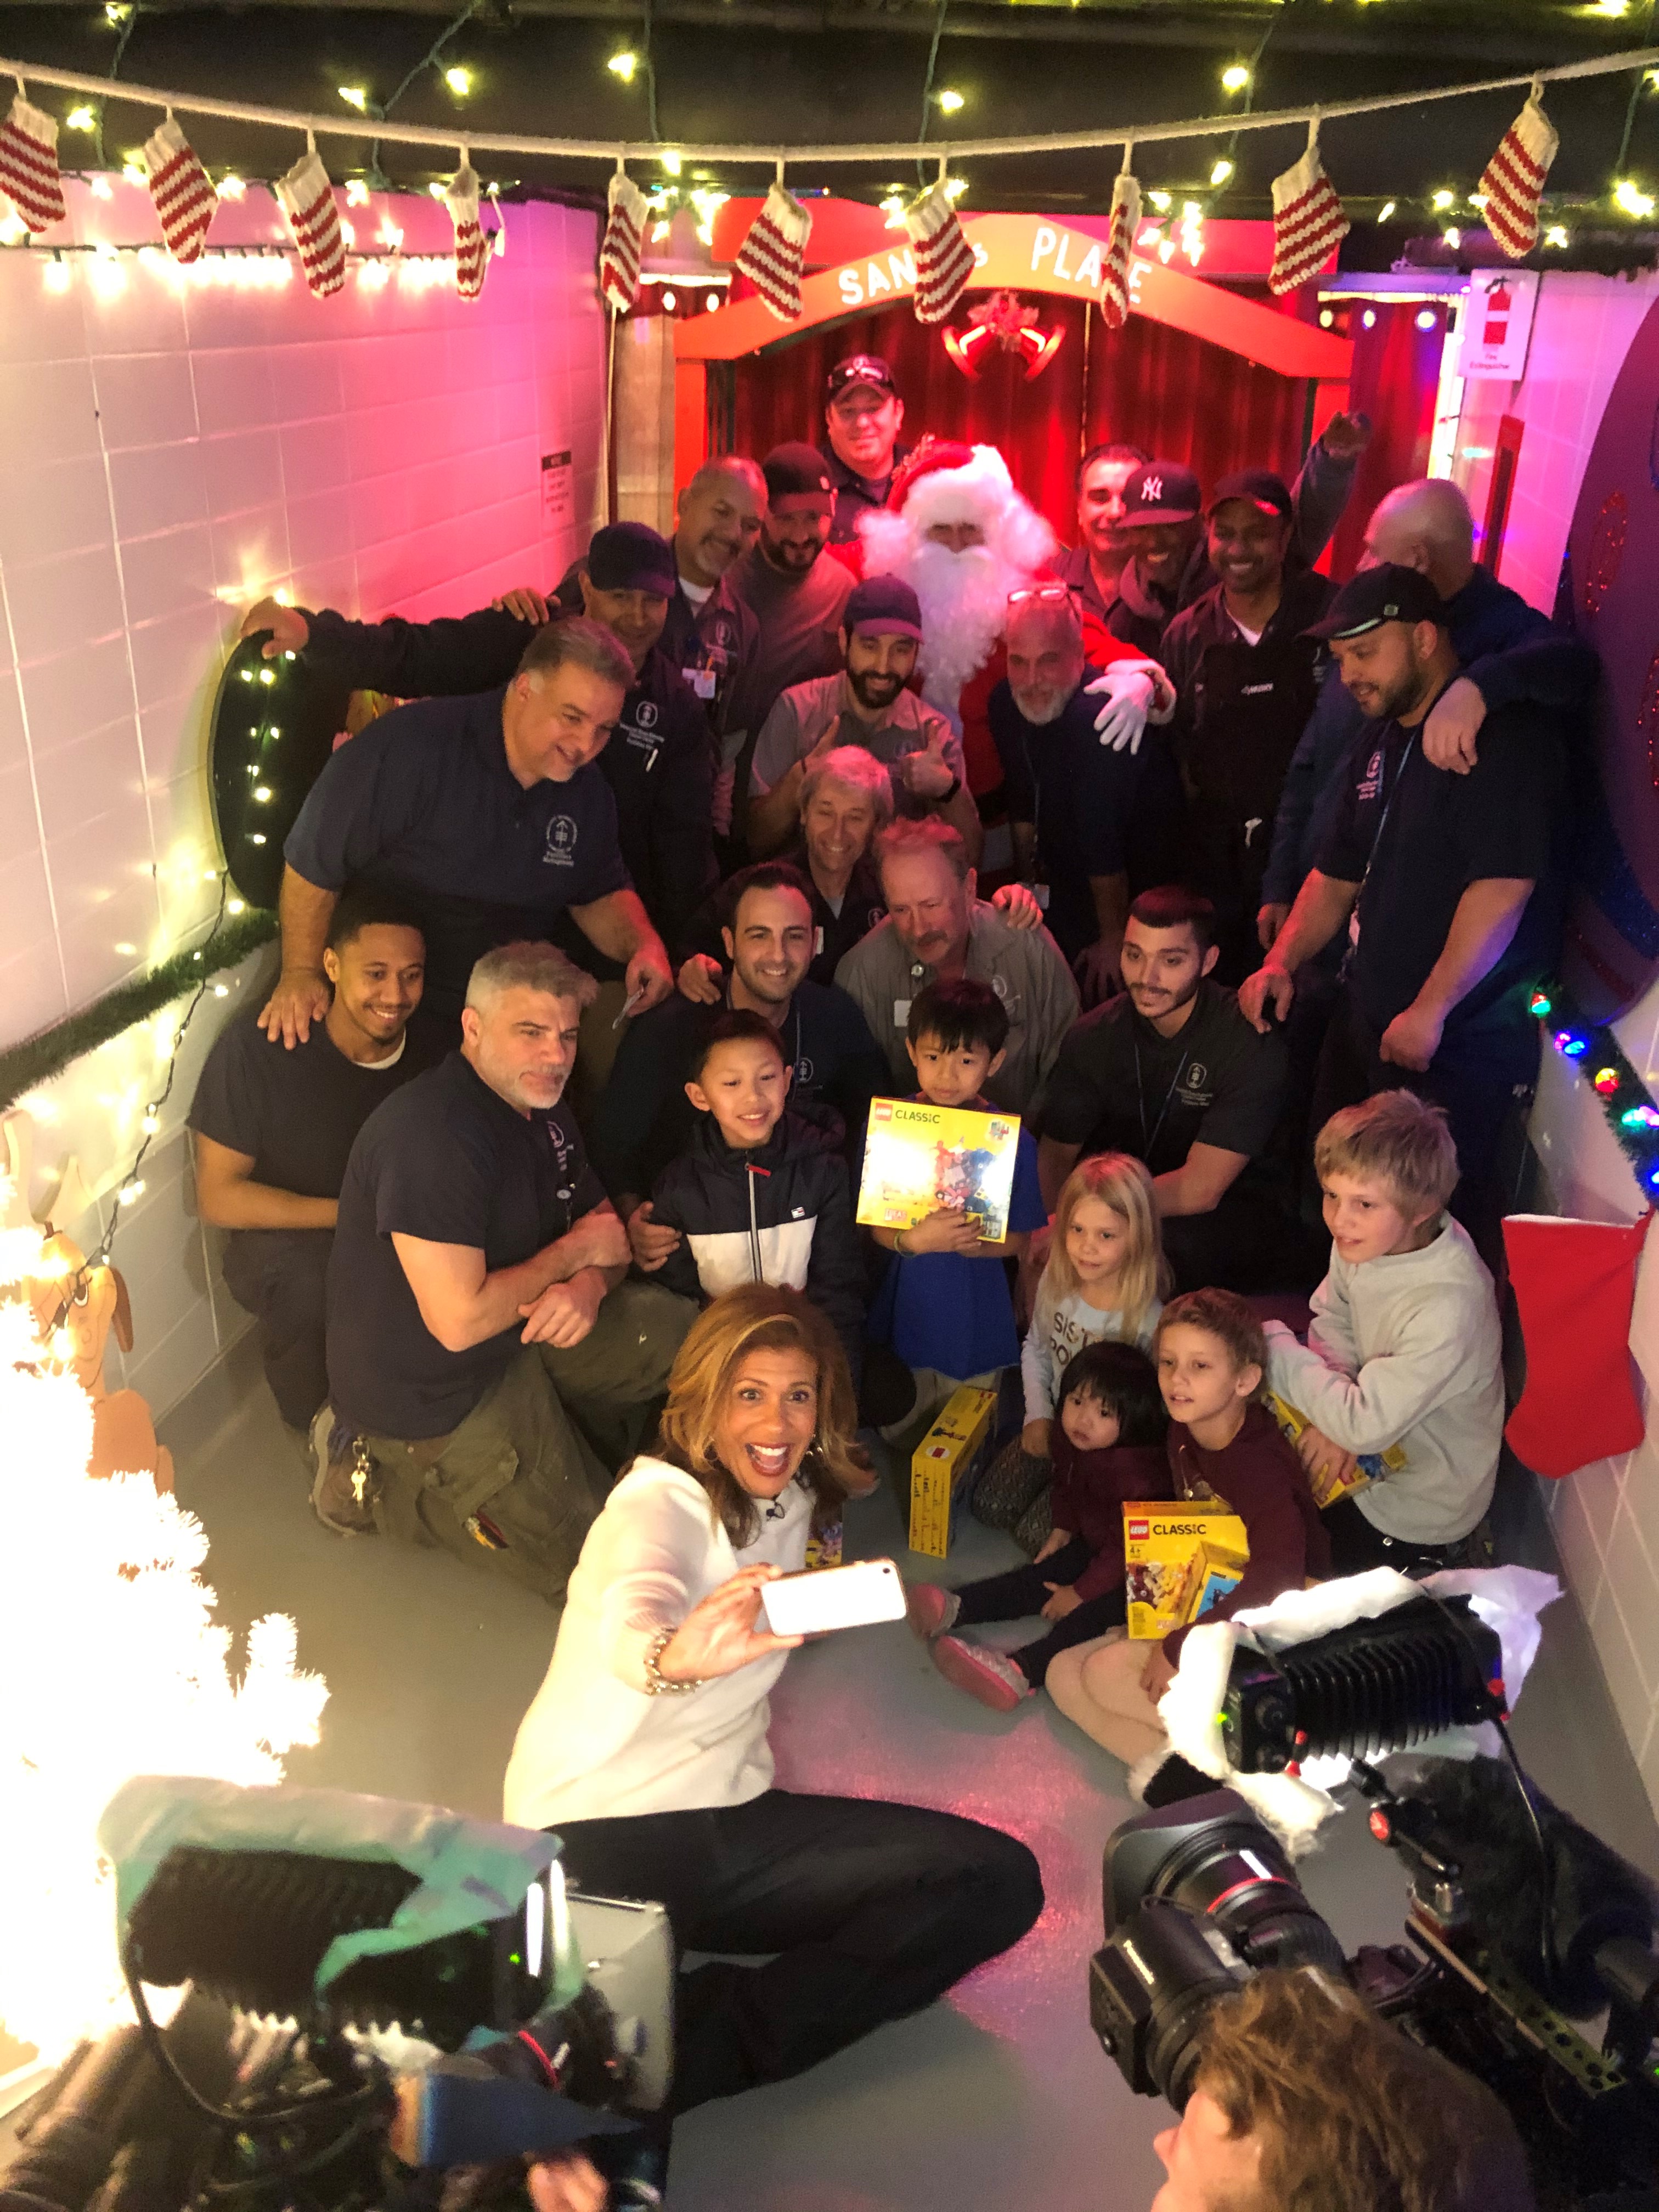 Today Show host, Hoda Kotb, takes a selfie with MSK’s Department of Facilities in MSK’s Holiday Hallway